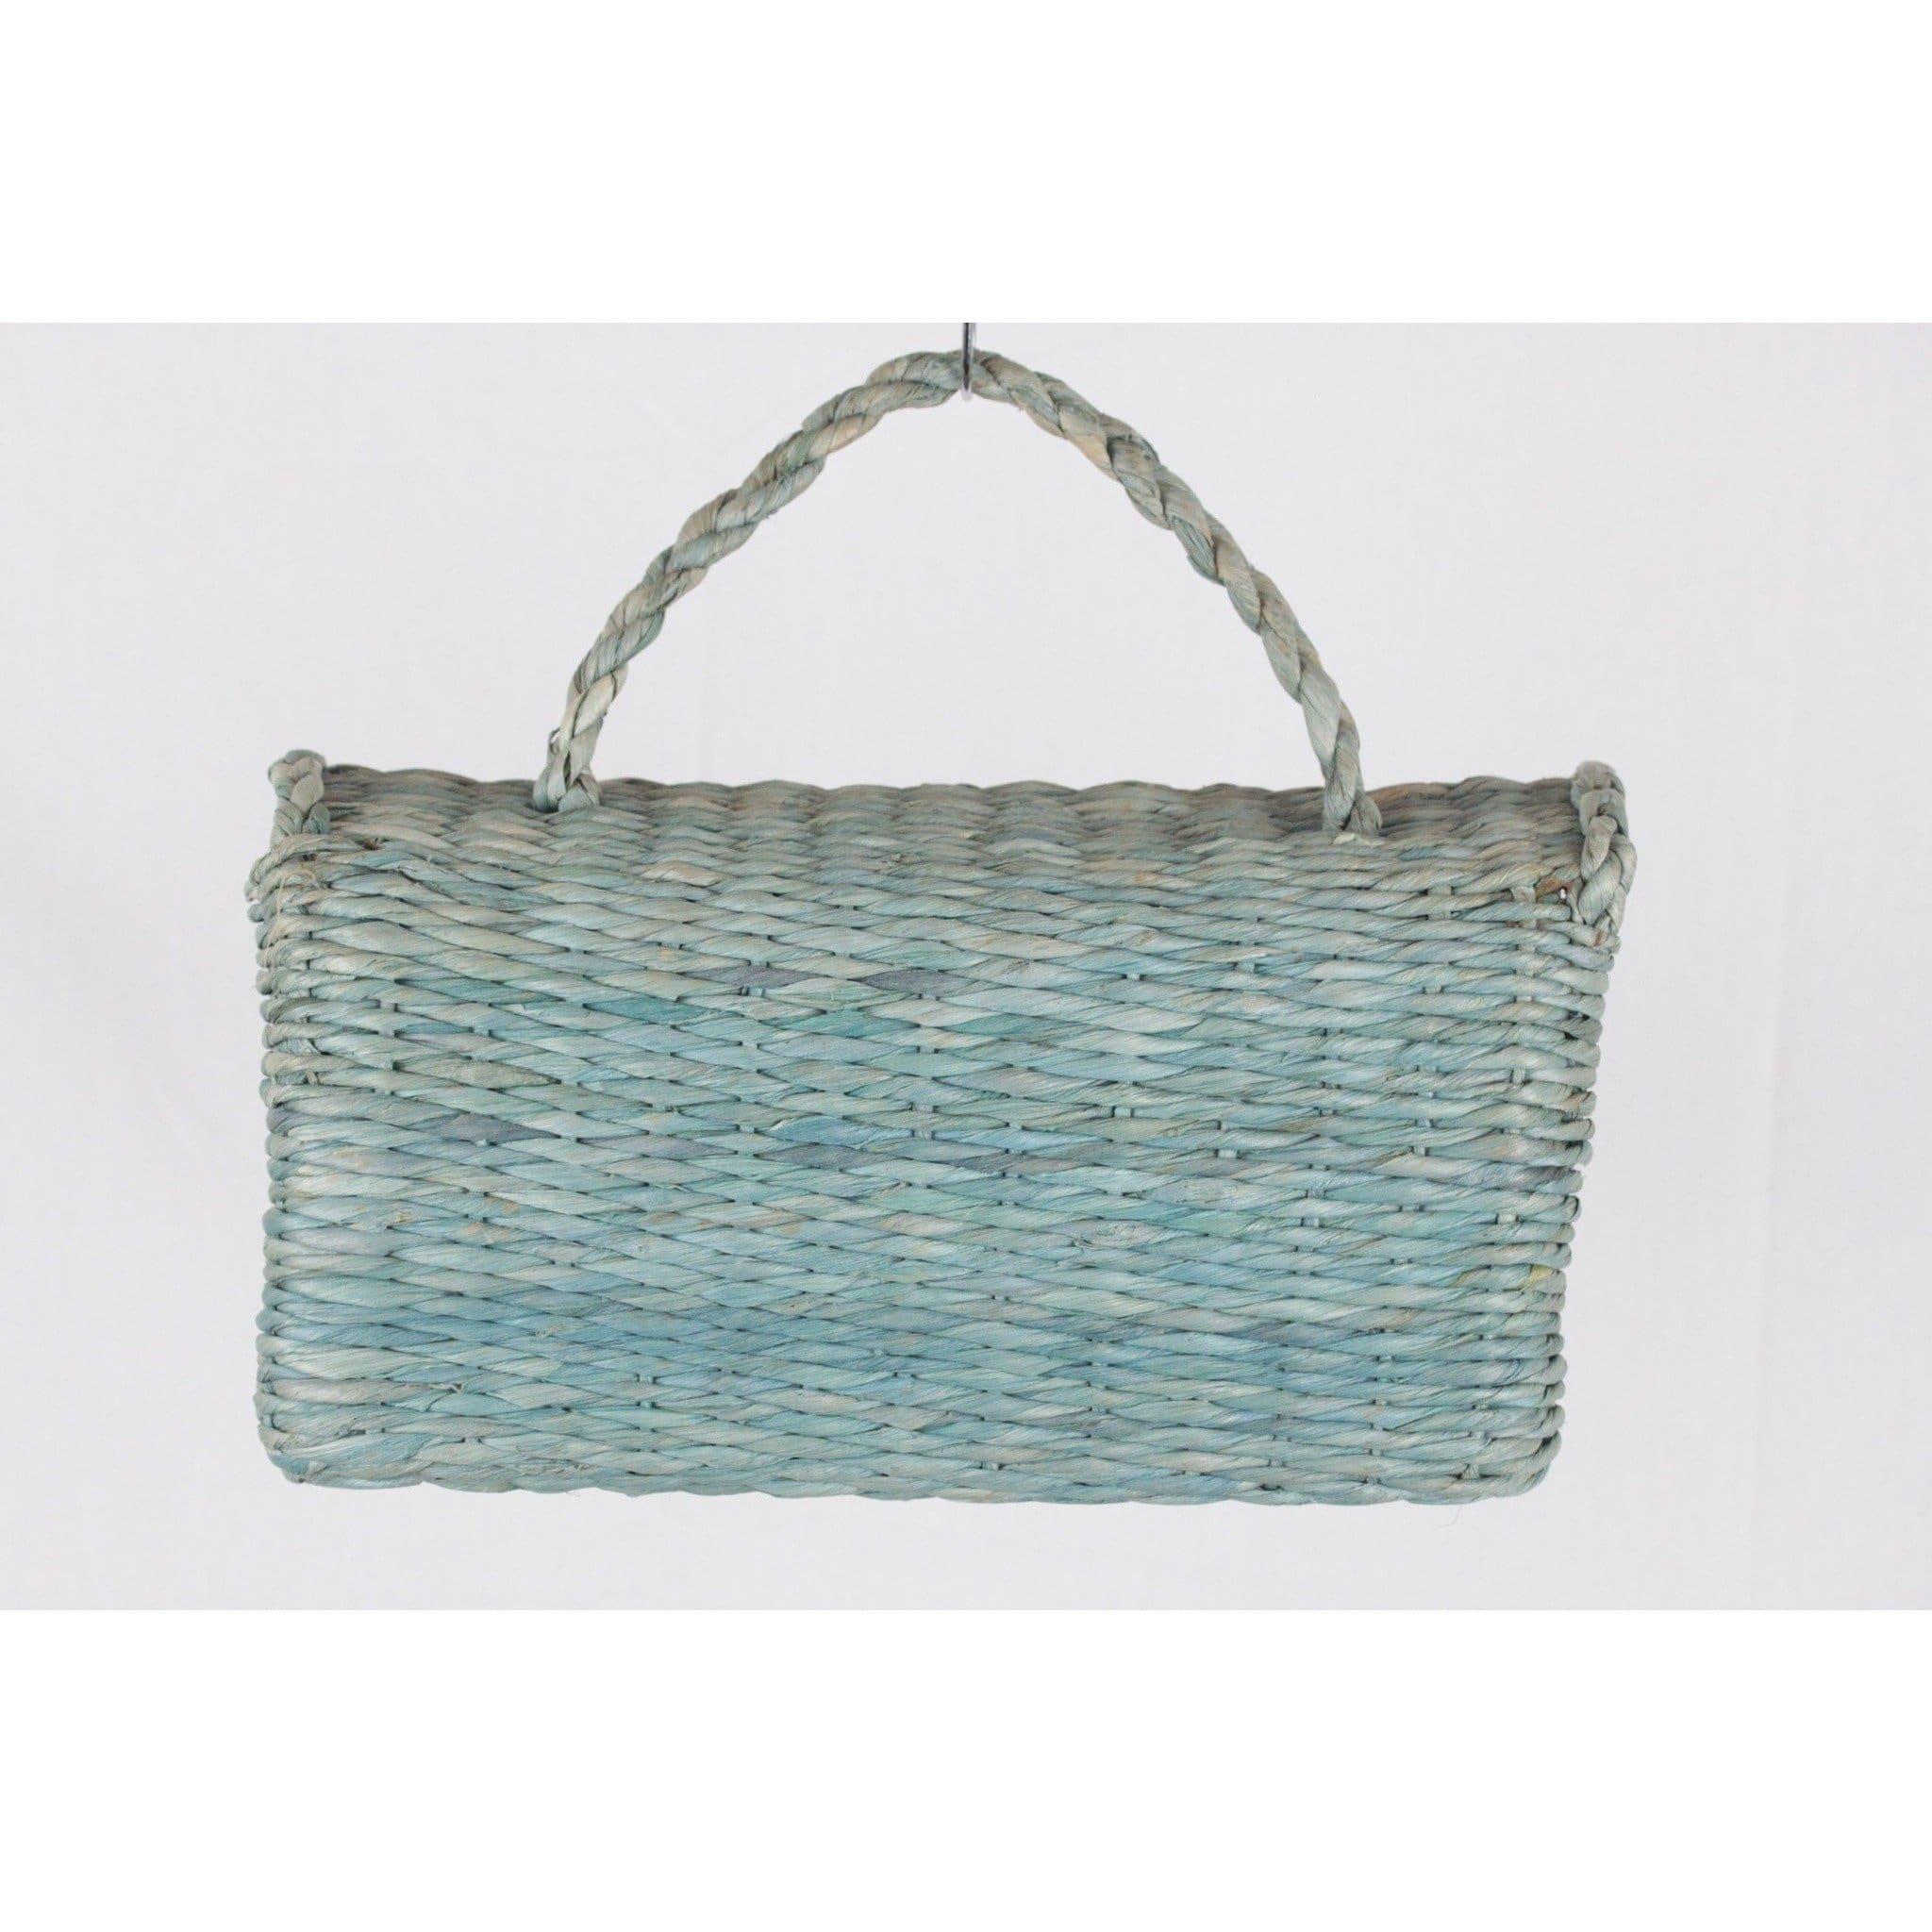 Beautiful vintage Roberta di Camerino aqua green Woven Raffia Straw Handbag Bag. Gold metal hardware. Flap with double button closure on the front. Internal lining (color, fabric): Green leather lining. Internal sections: 1 side zip pocket & 2 side